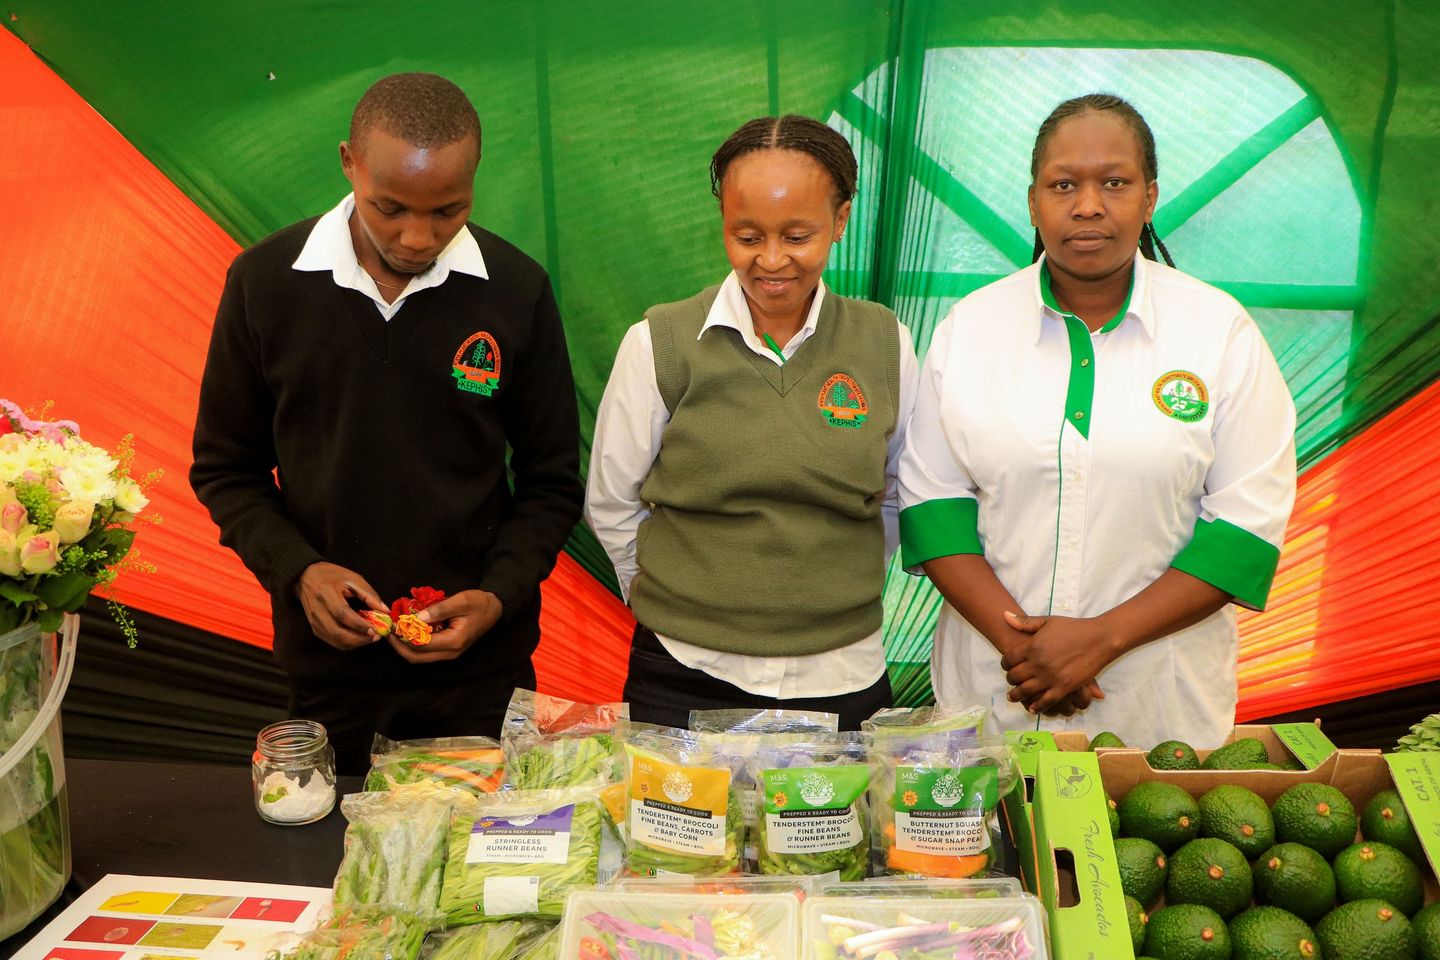 #KEPHIS has successfully opened up markets for Kenya’s horticultural produce including China for avocado, Japan & Pakistan for tea, Australia for flowers & Jordan, SA & Mauritius for Mangoes.